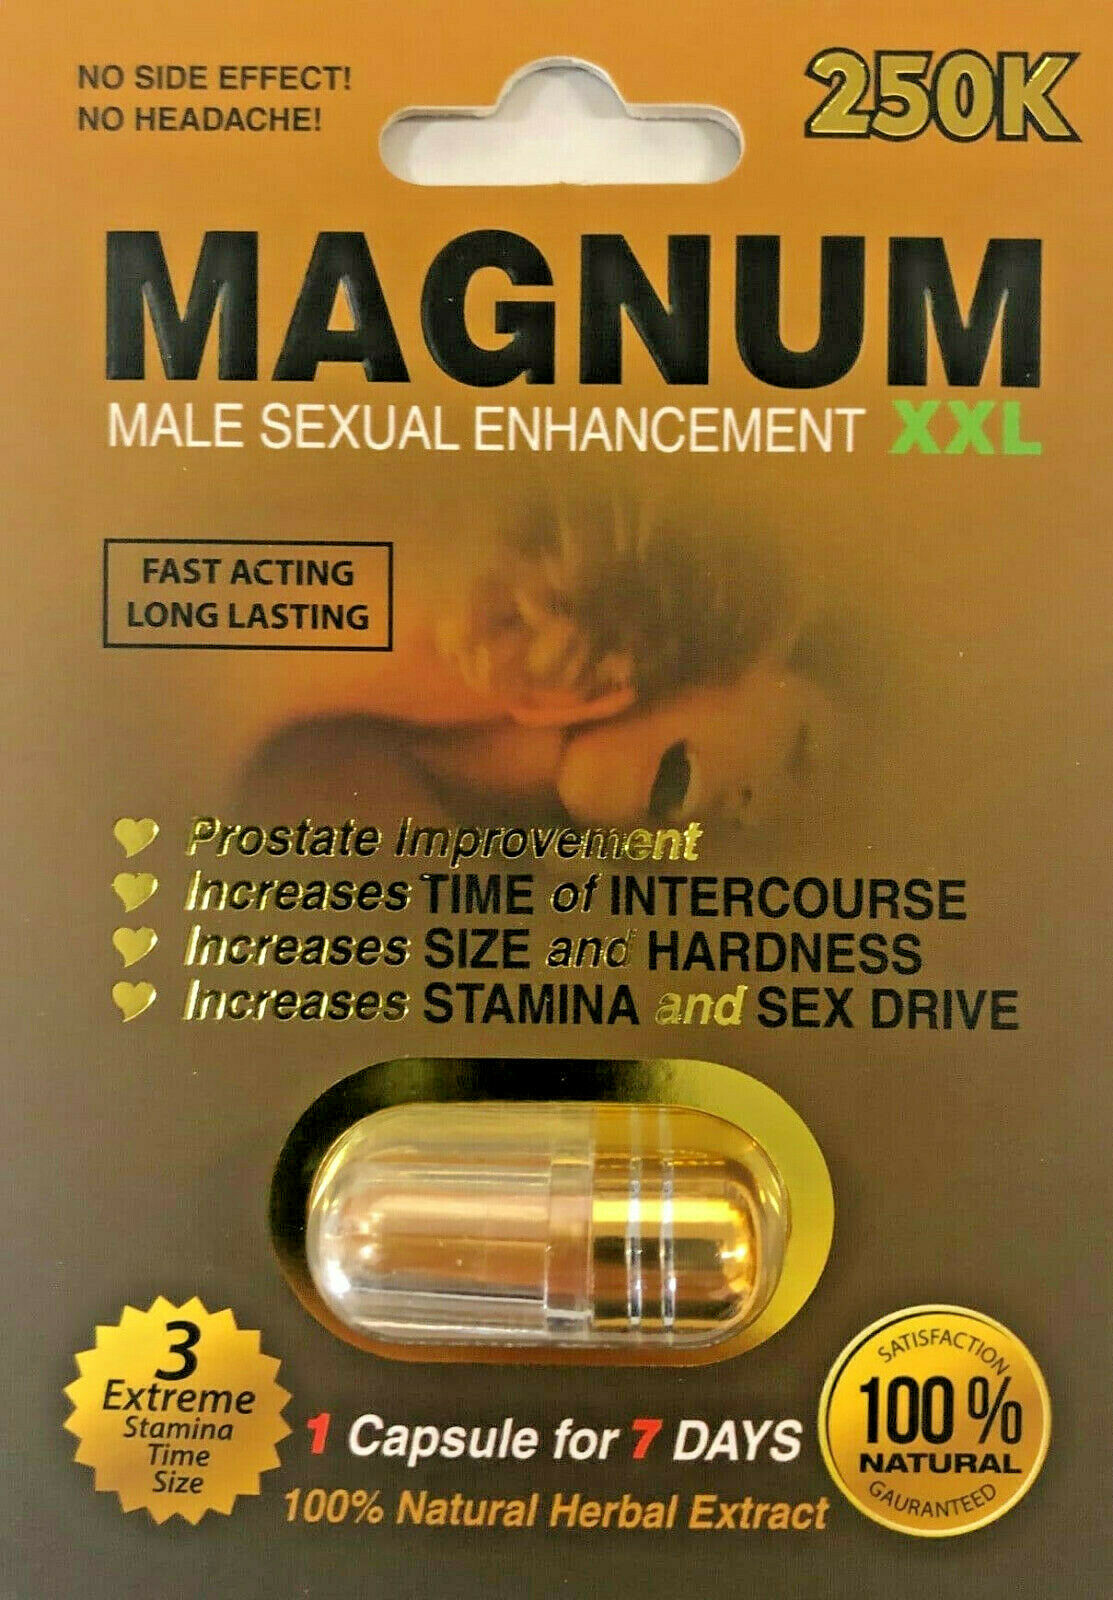 Magnum 250k Gold Male Sexual Performance Enhancement Tablet 5 Capsules Pack Icommerce On Web